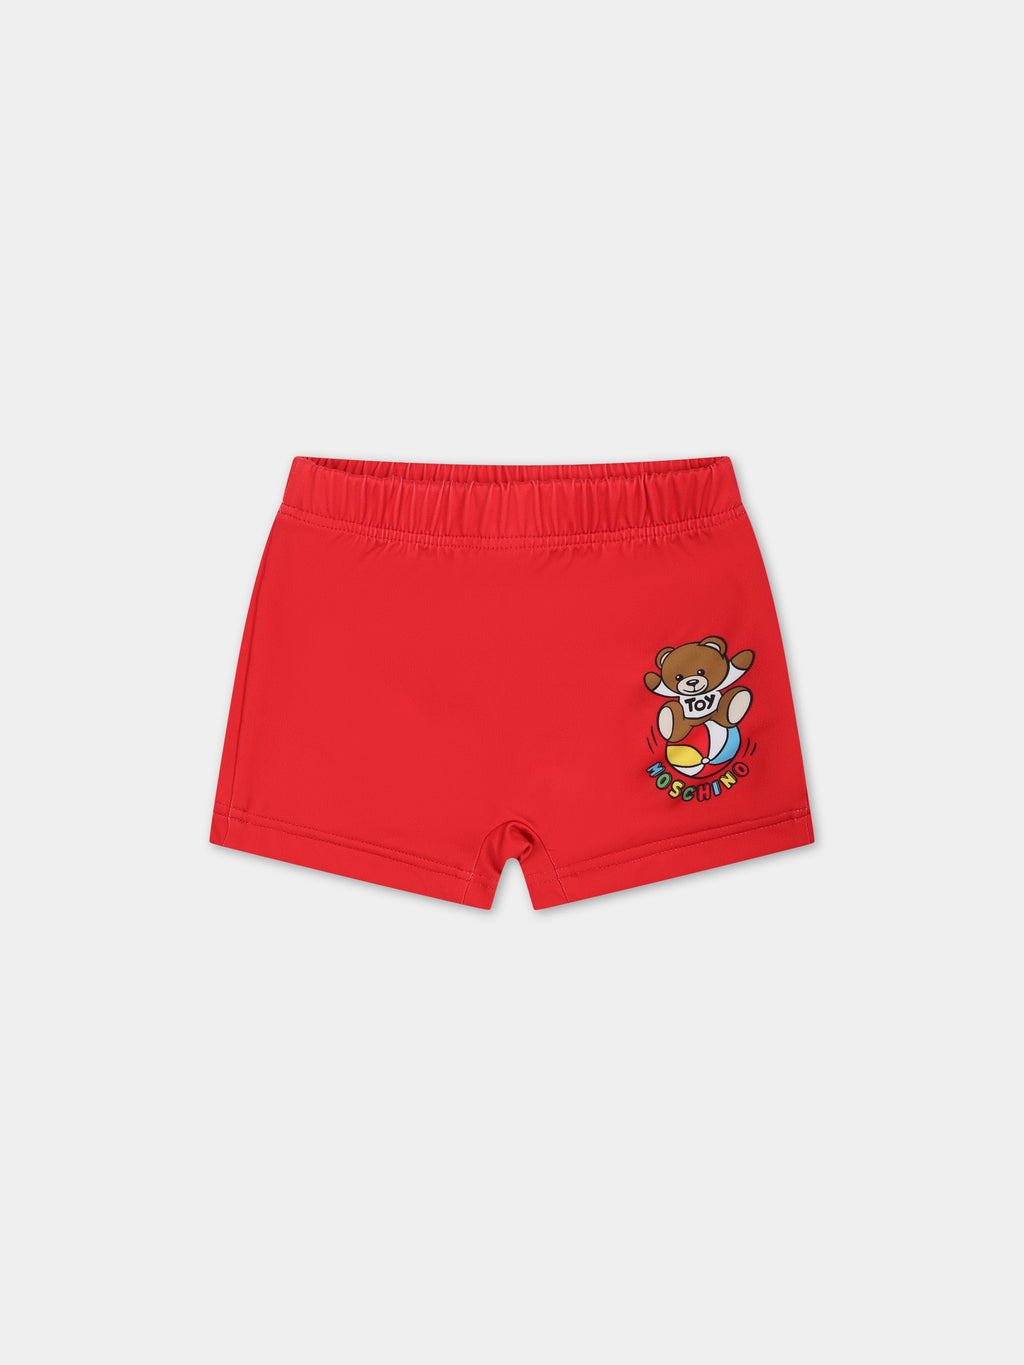 Red swimsuit for baby boy with Teddy bear and multicolor logo